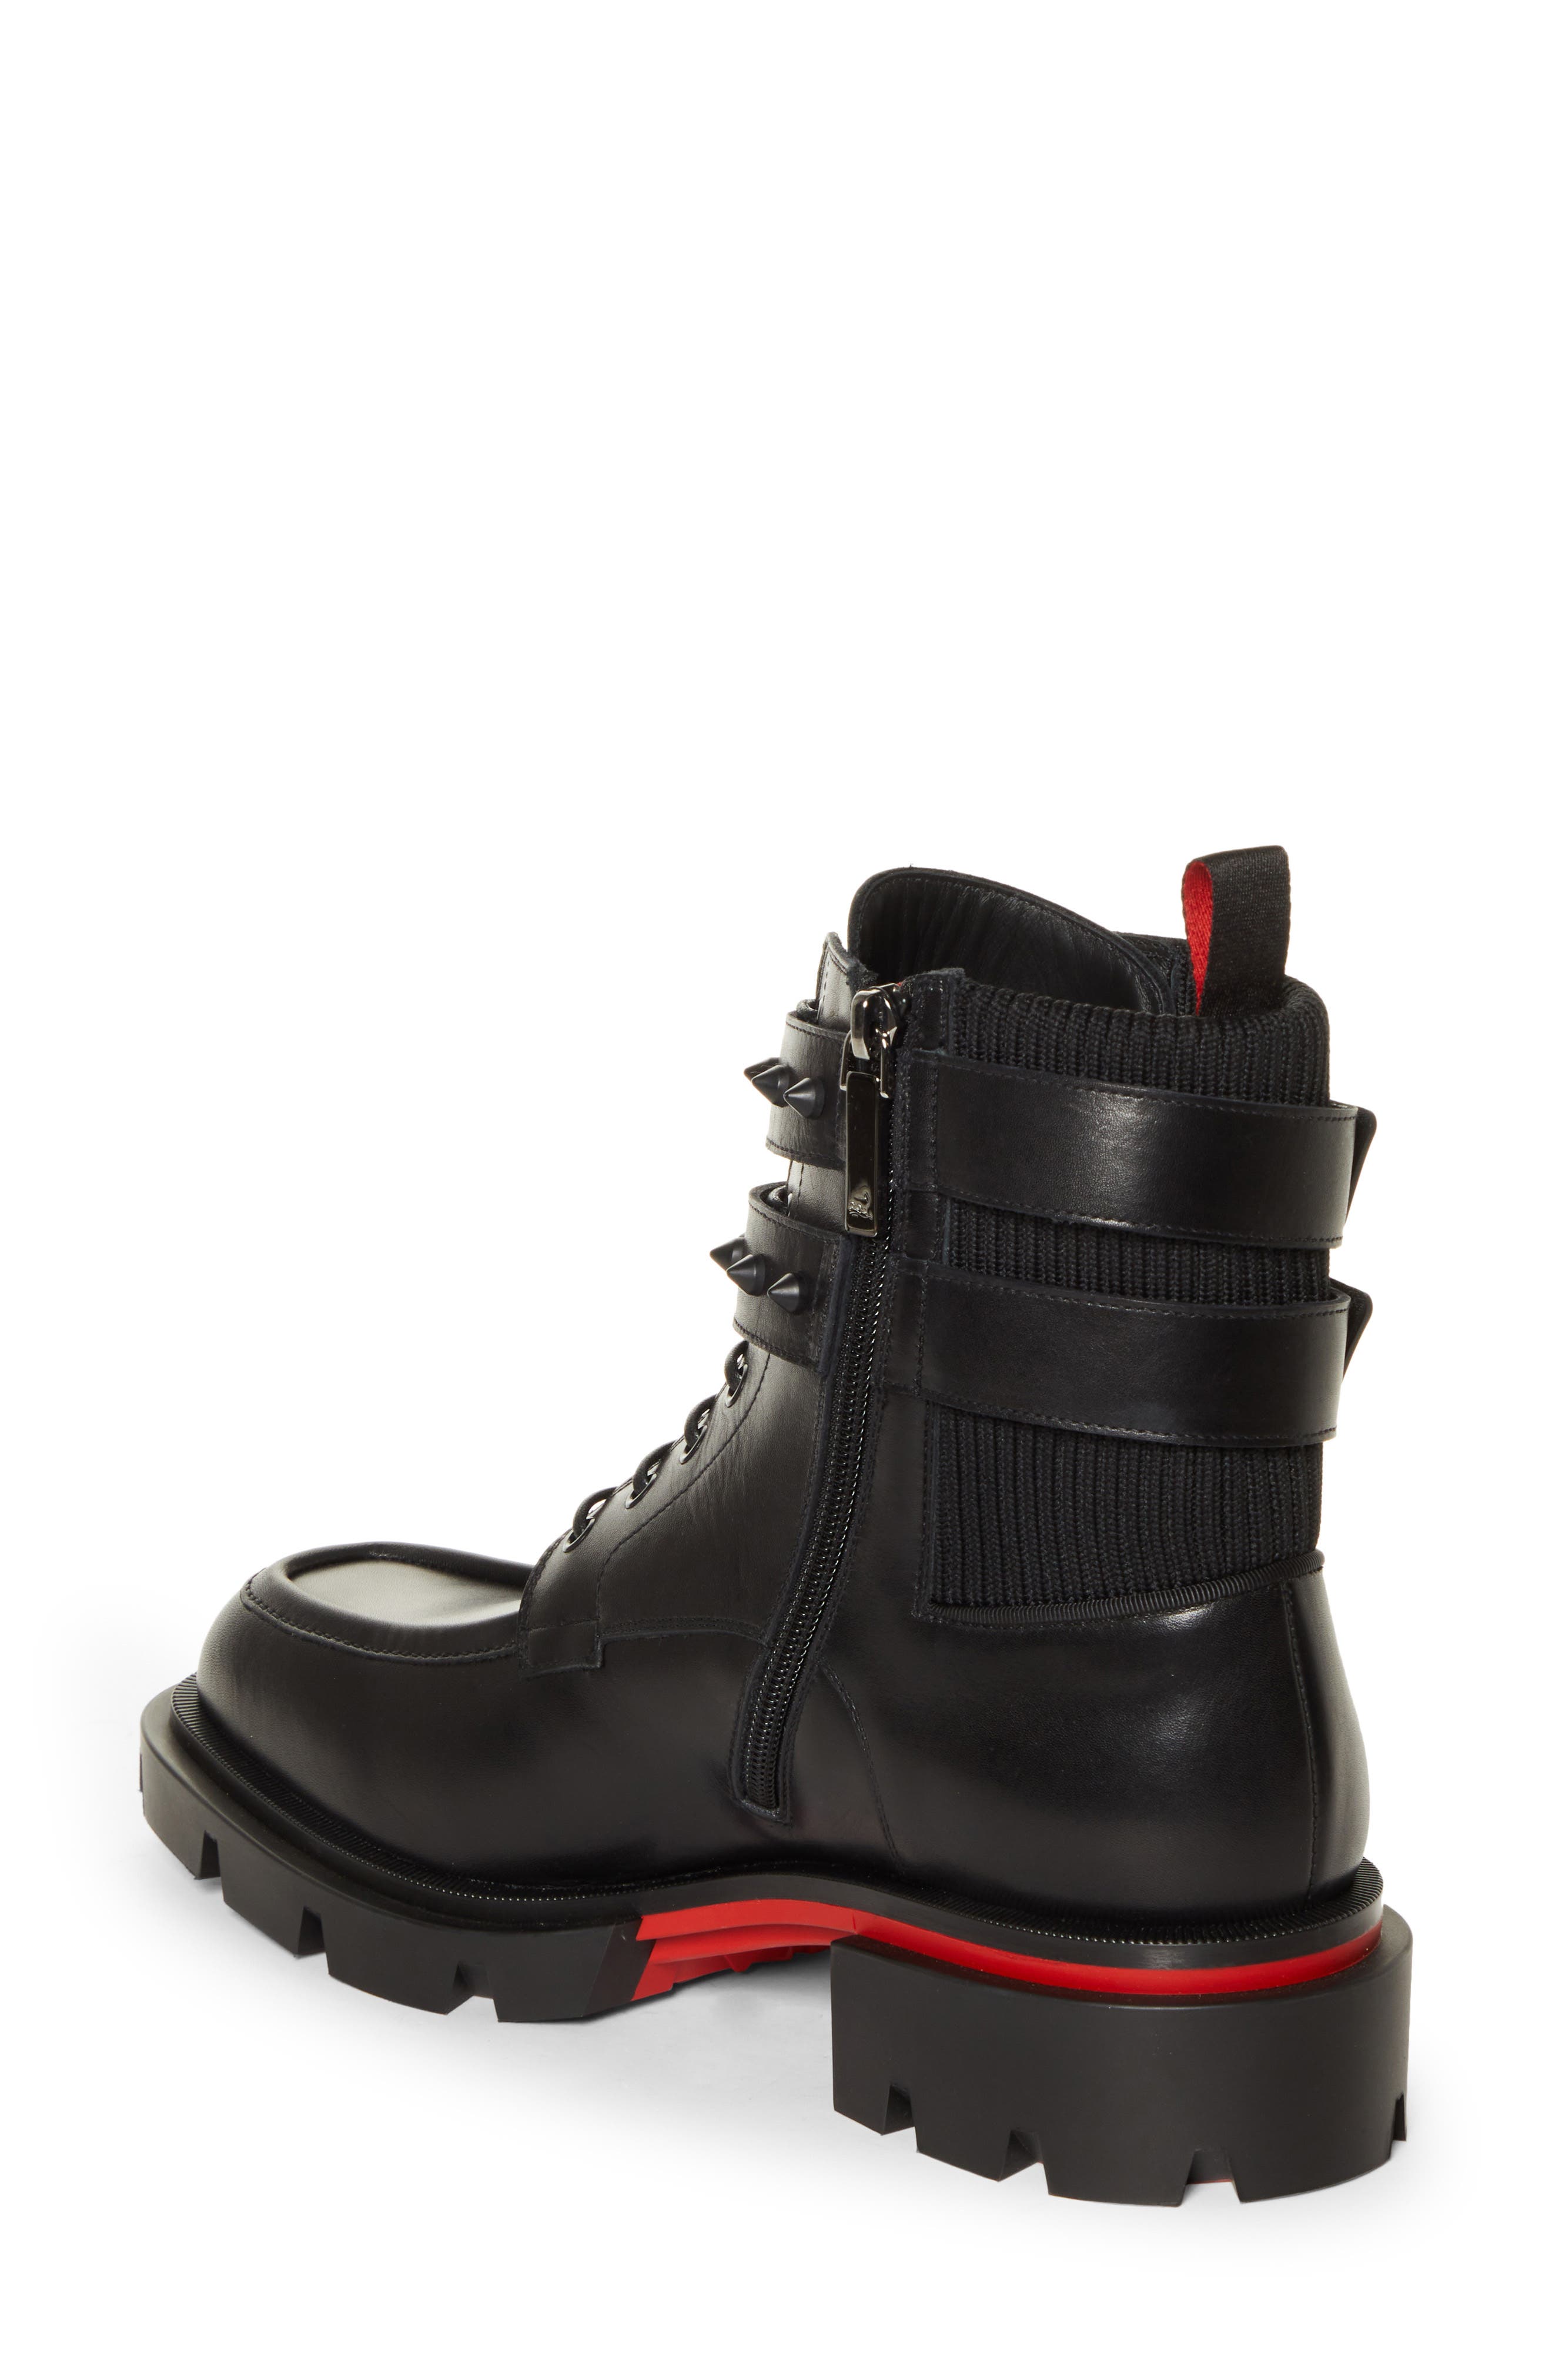 Christian Louboutin Men's Our Fight Zip Leather Combat Boots